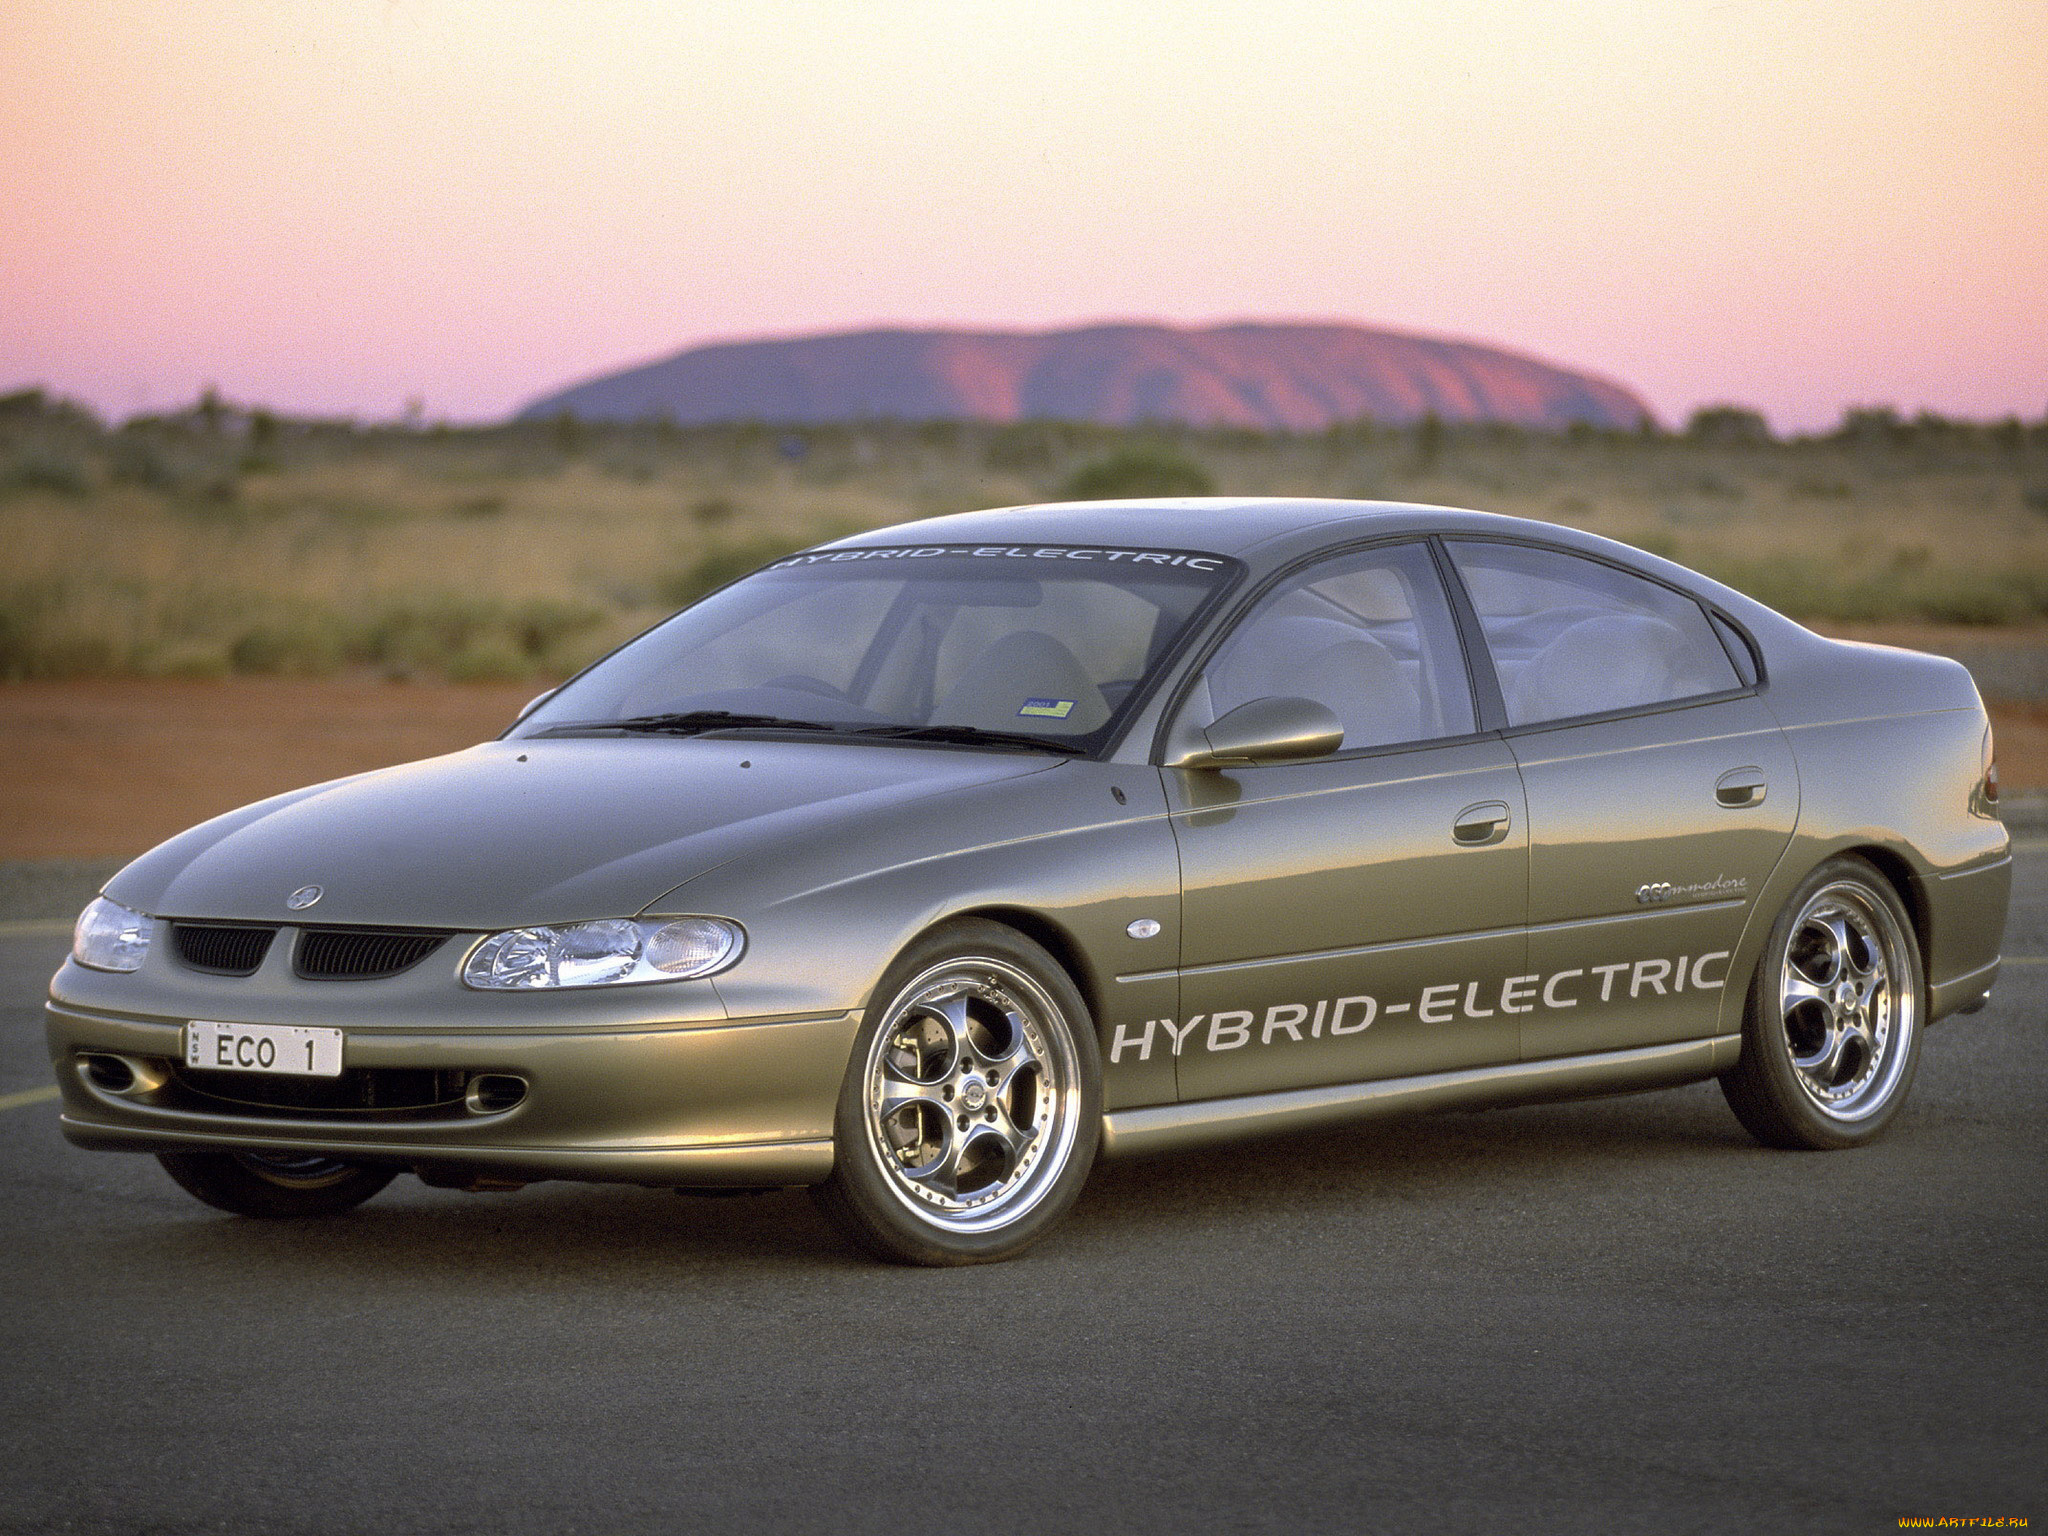 holden ecommodore concept 2000, , holden, concept, 2000, ecommodore